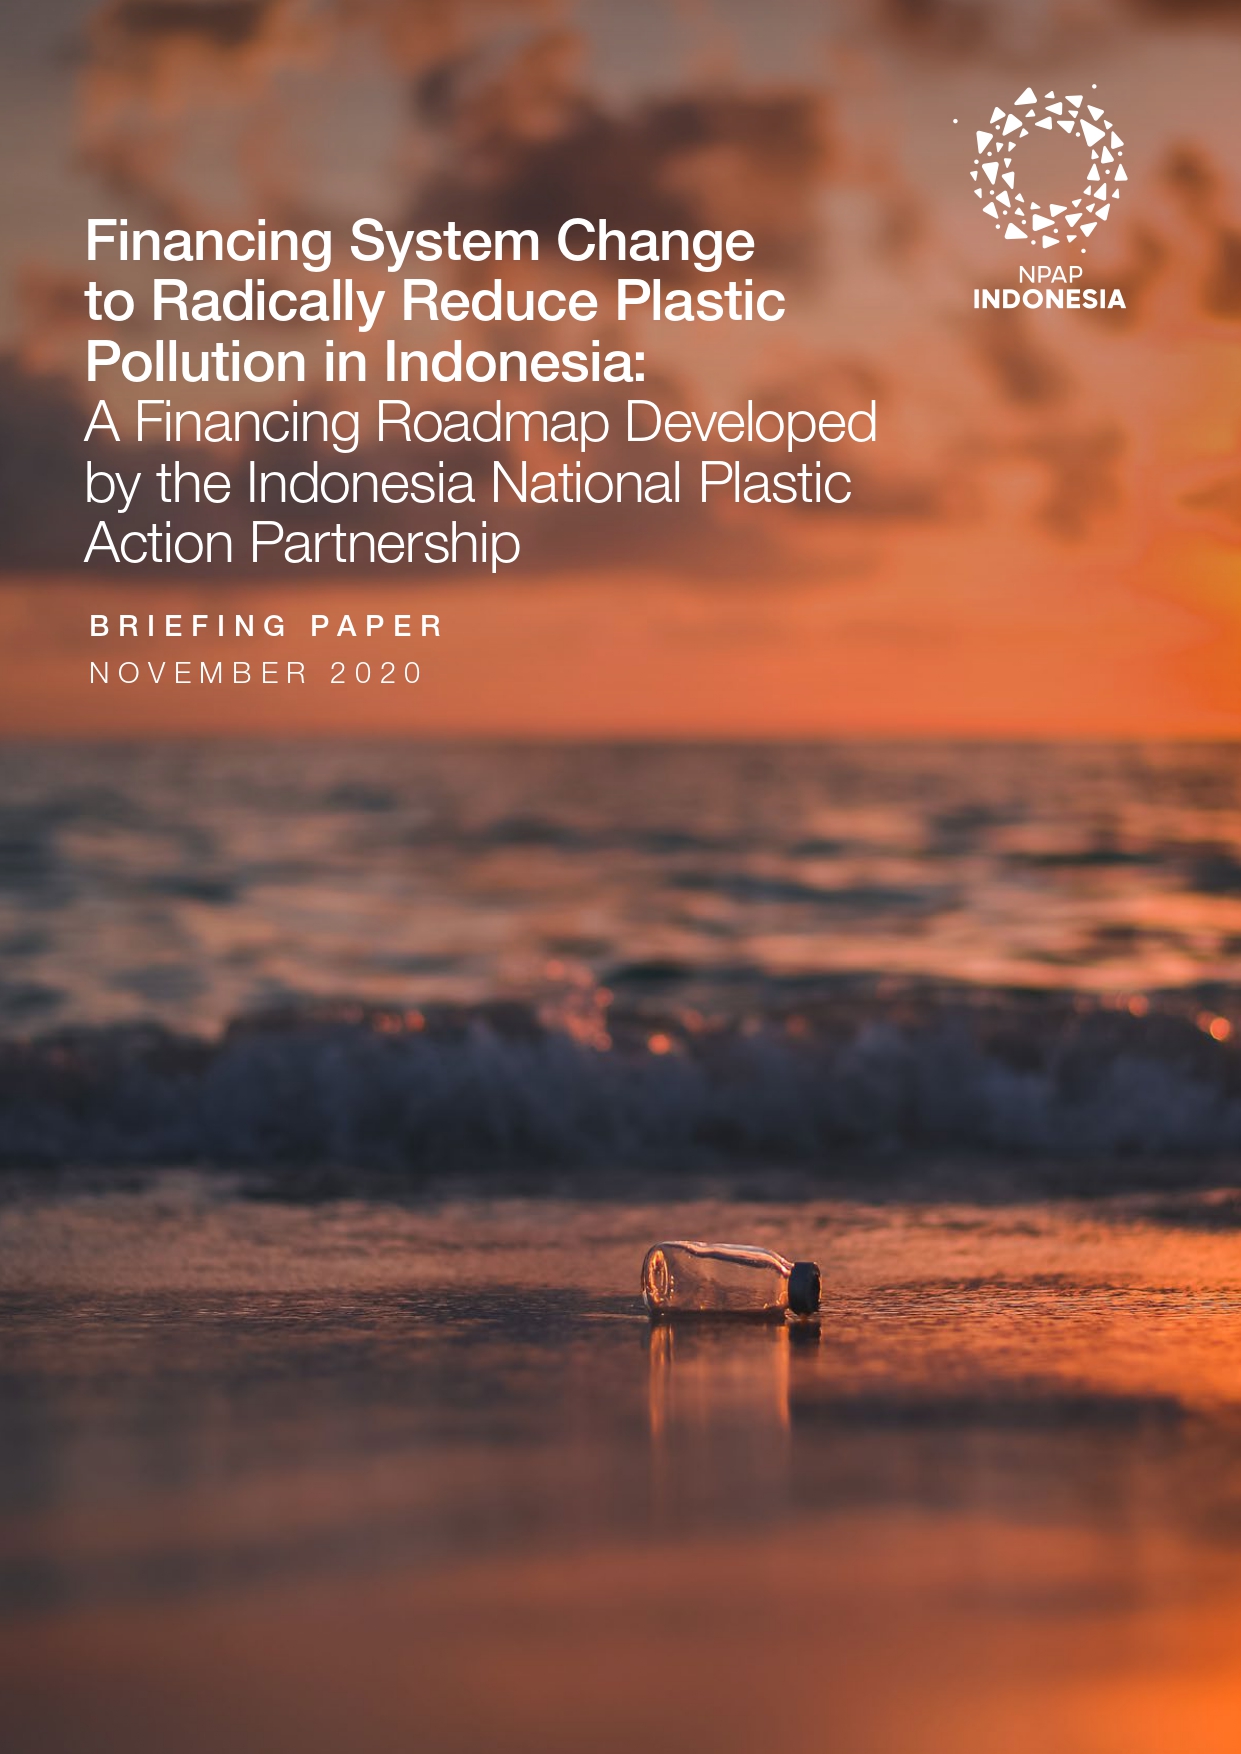 Financing System Change to Radically Reduce Plastic Pollution in Indonesia - November 2020